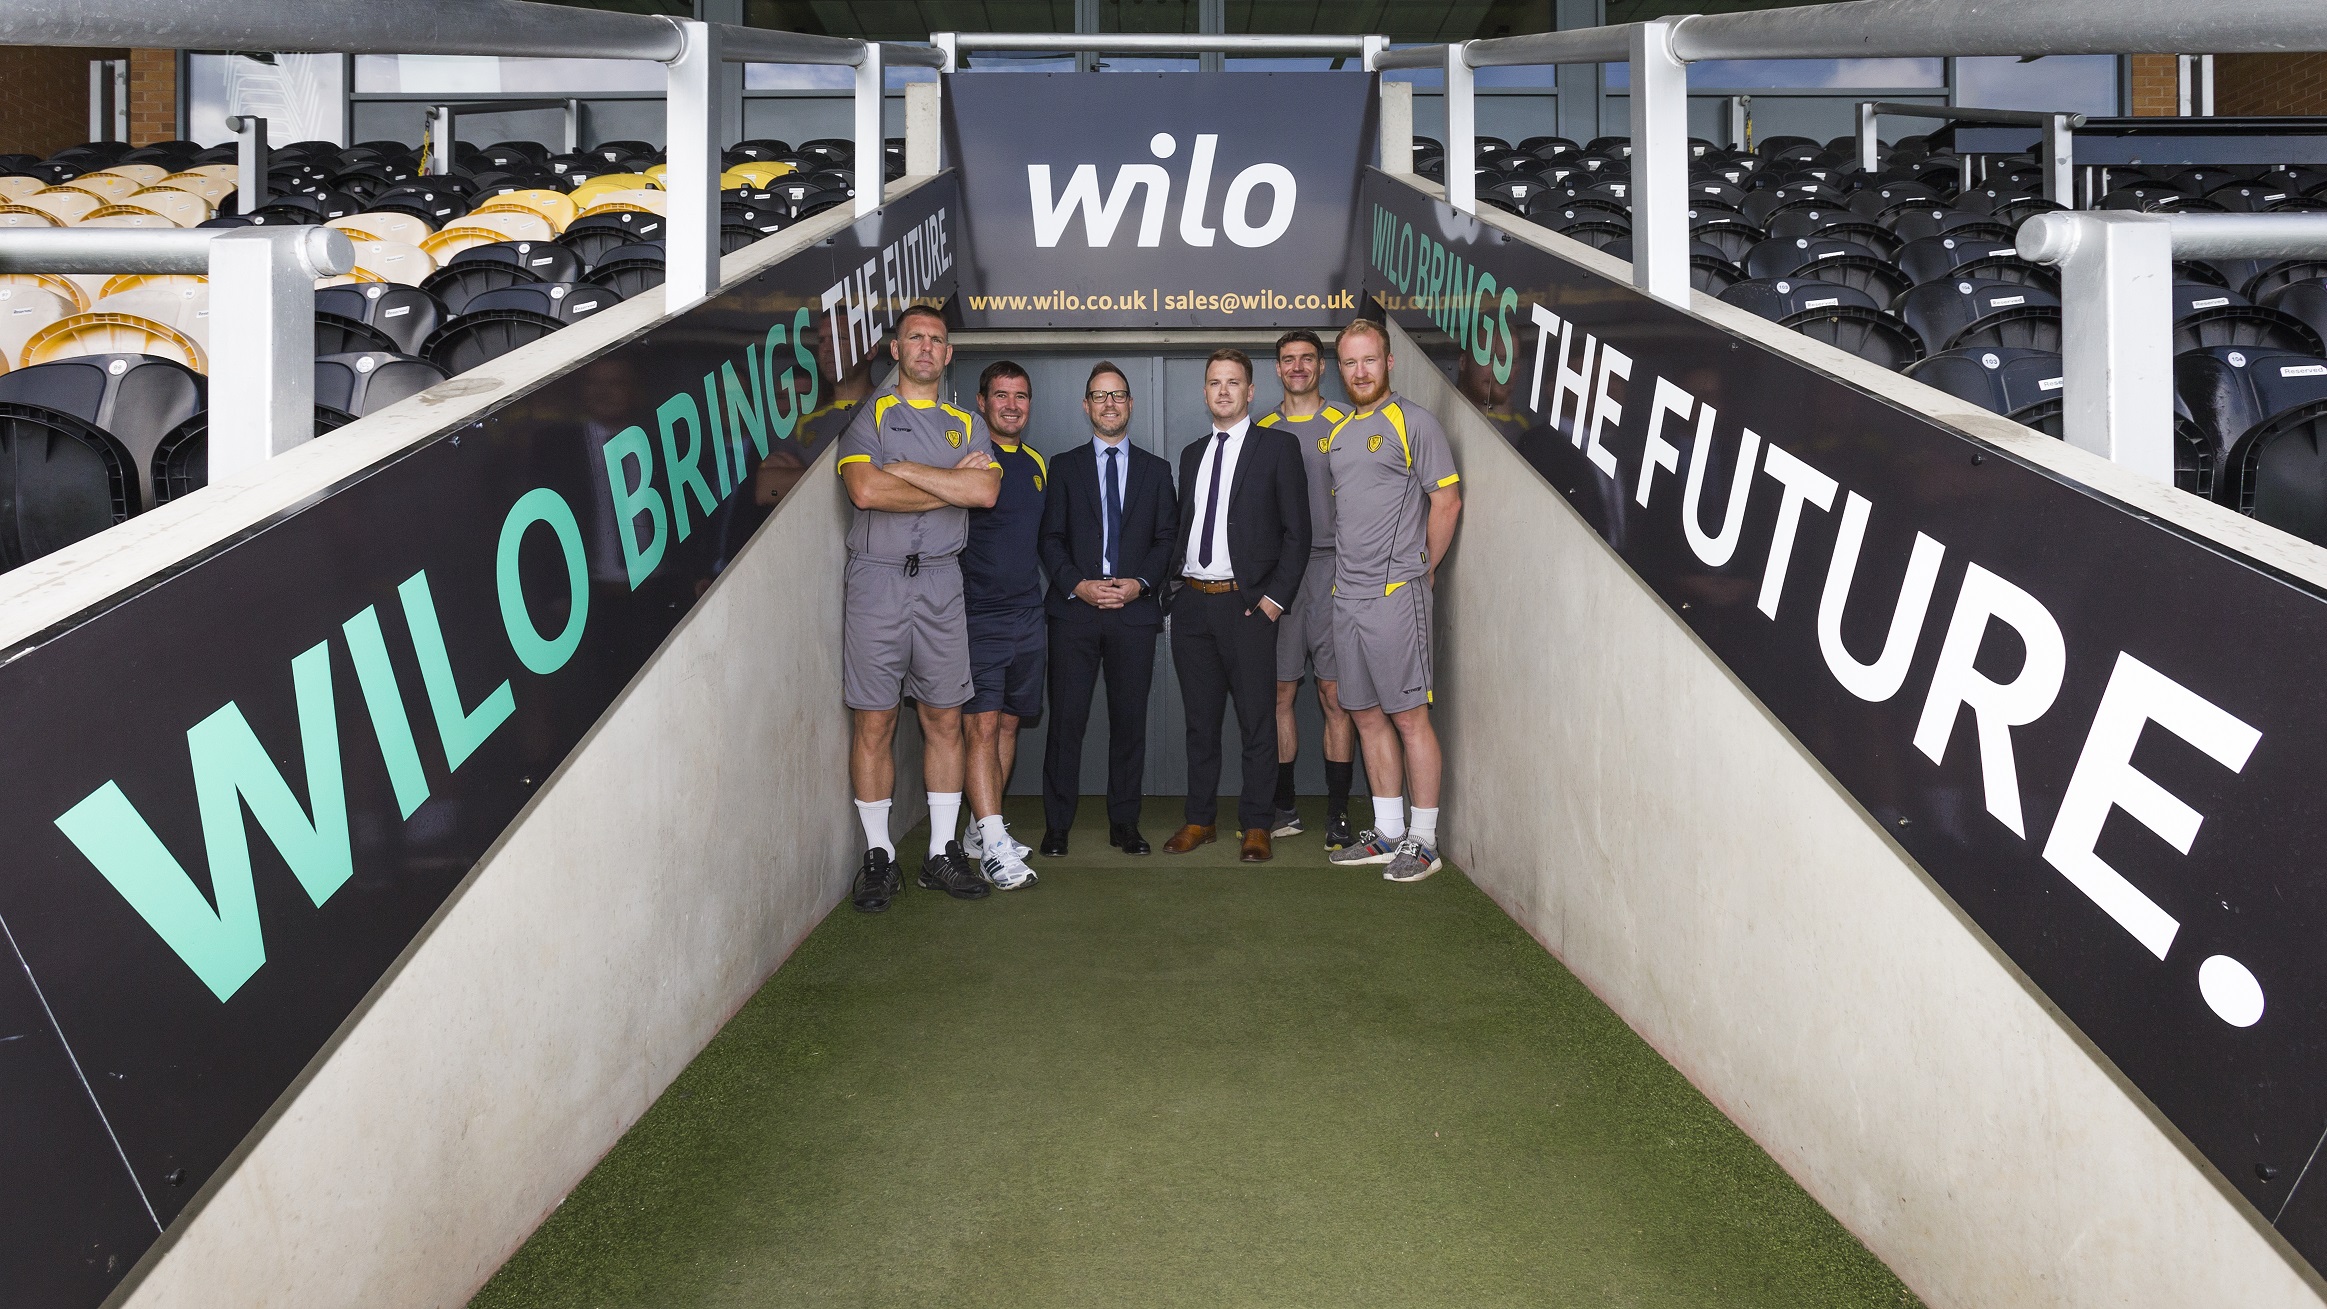 Left to right: Burton Albion captain Jake Buxton, manager Nigel Clough; Richard Harden (MD Wilo UK); Morgan Warren-Ross (marketing manager Wilo UK), and players Stephen Bywater and Liam Boyce.